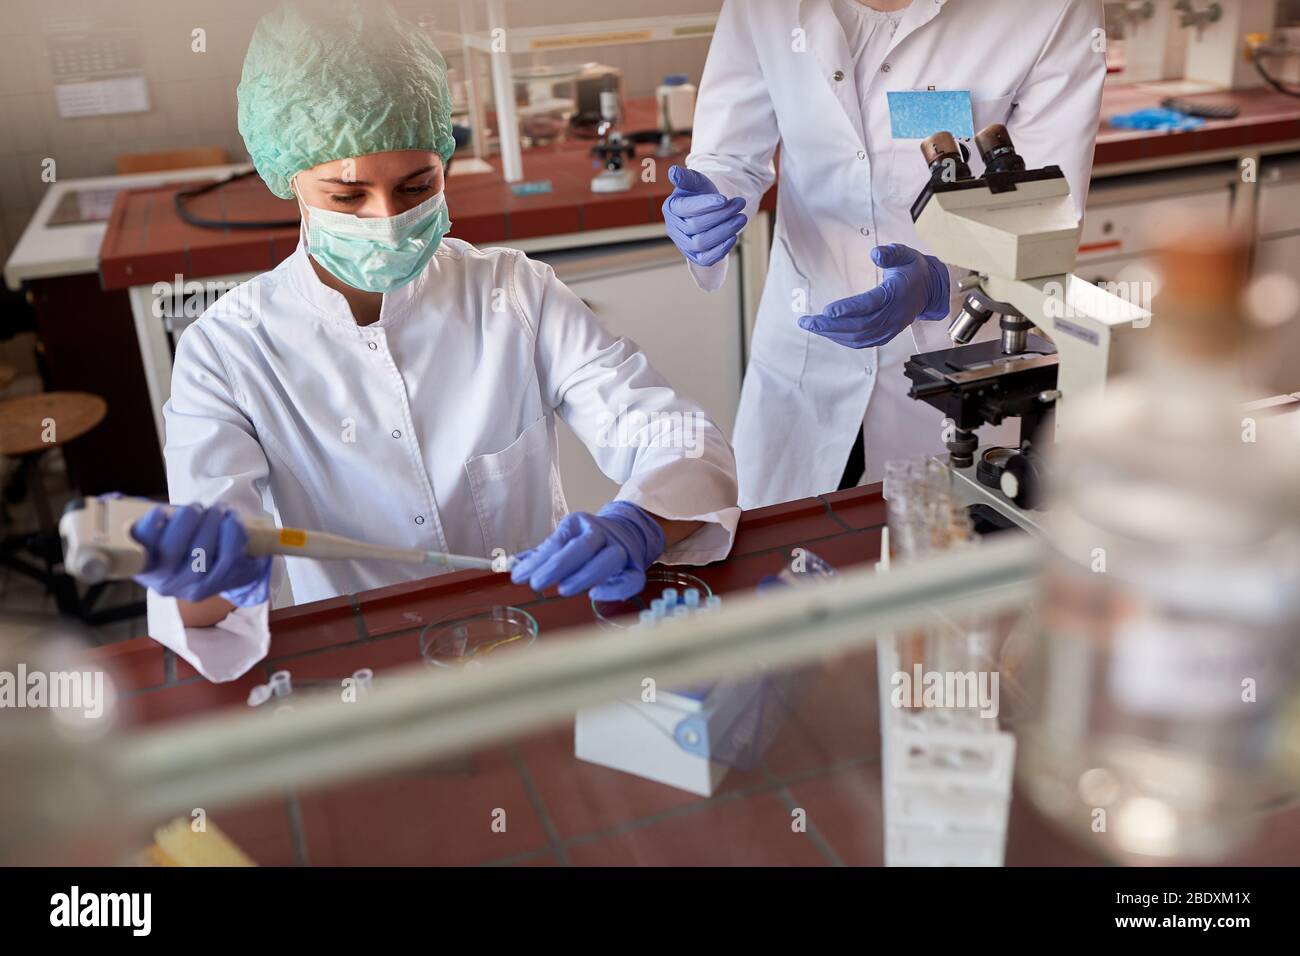 Medical workers examining samples on covid-19 in biochemistry lab Stock Photo